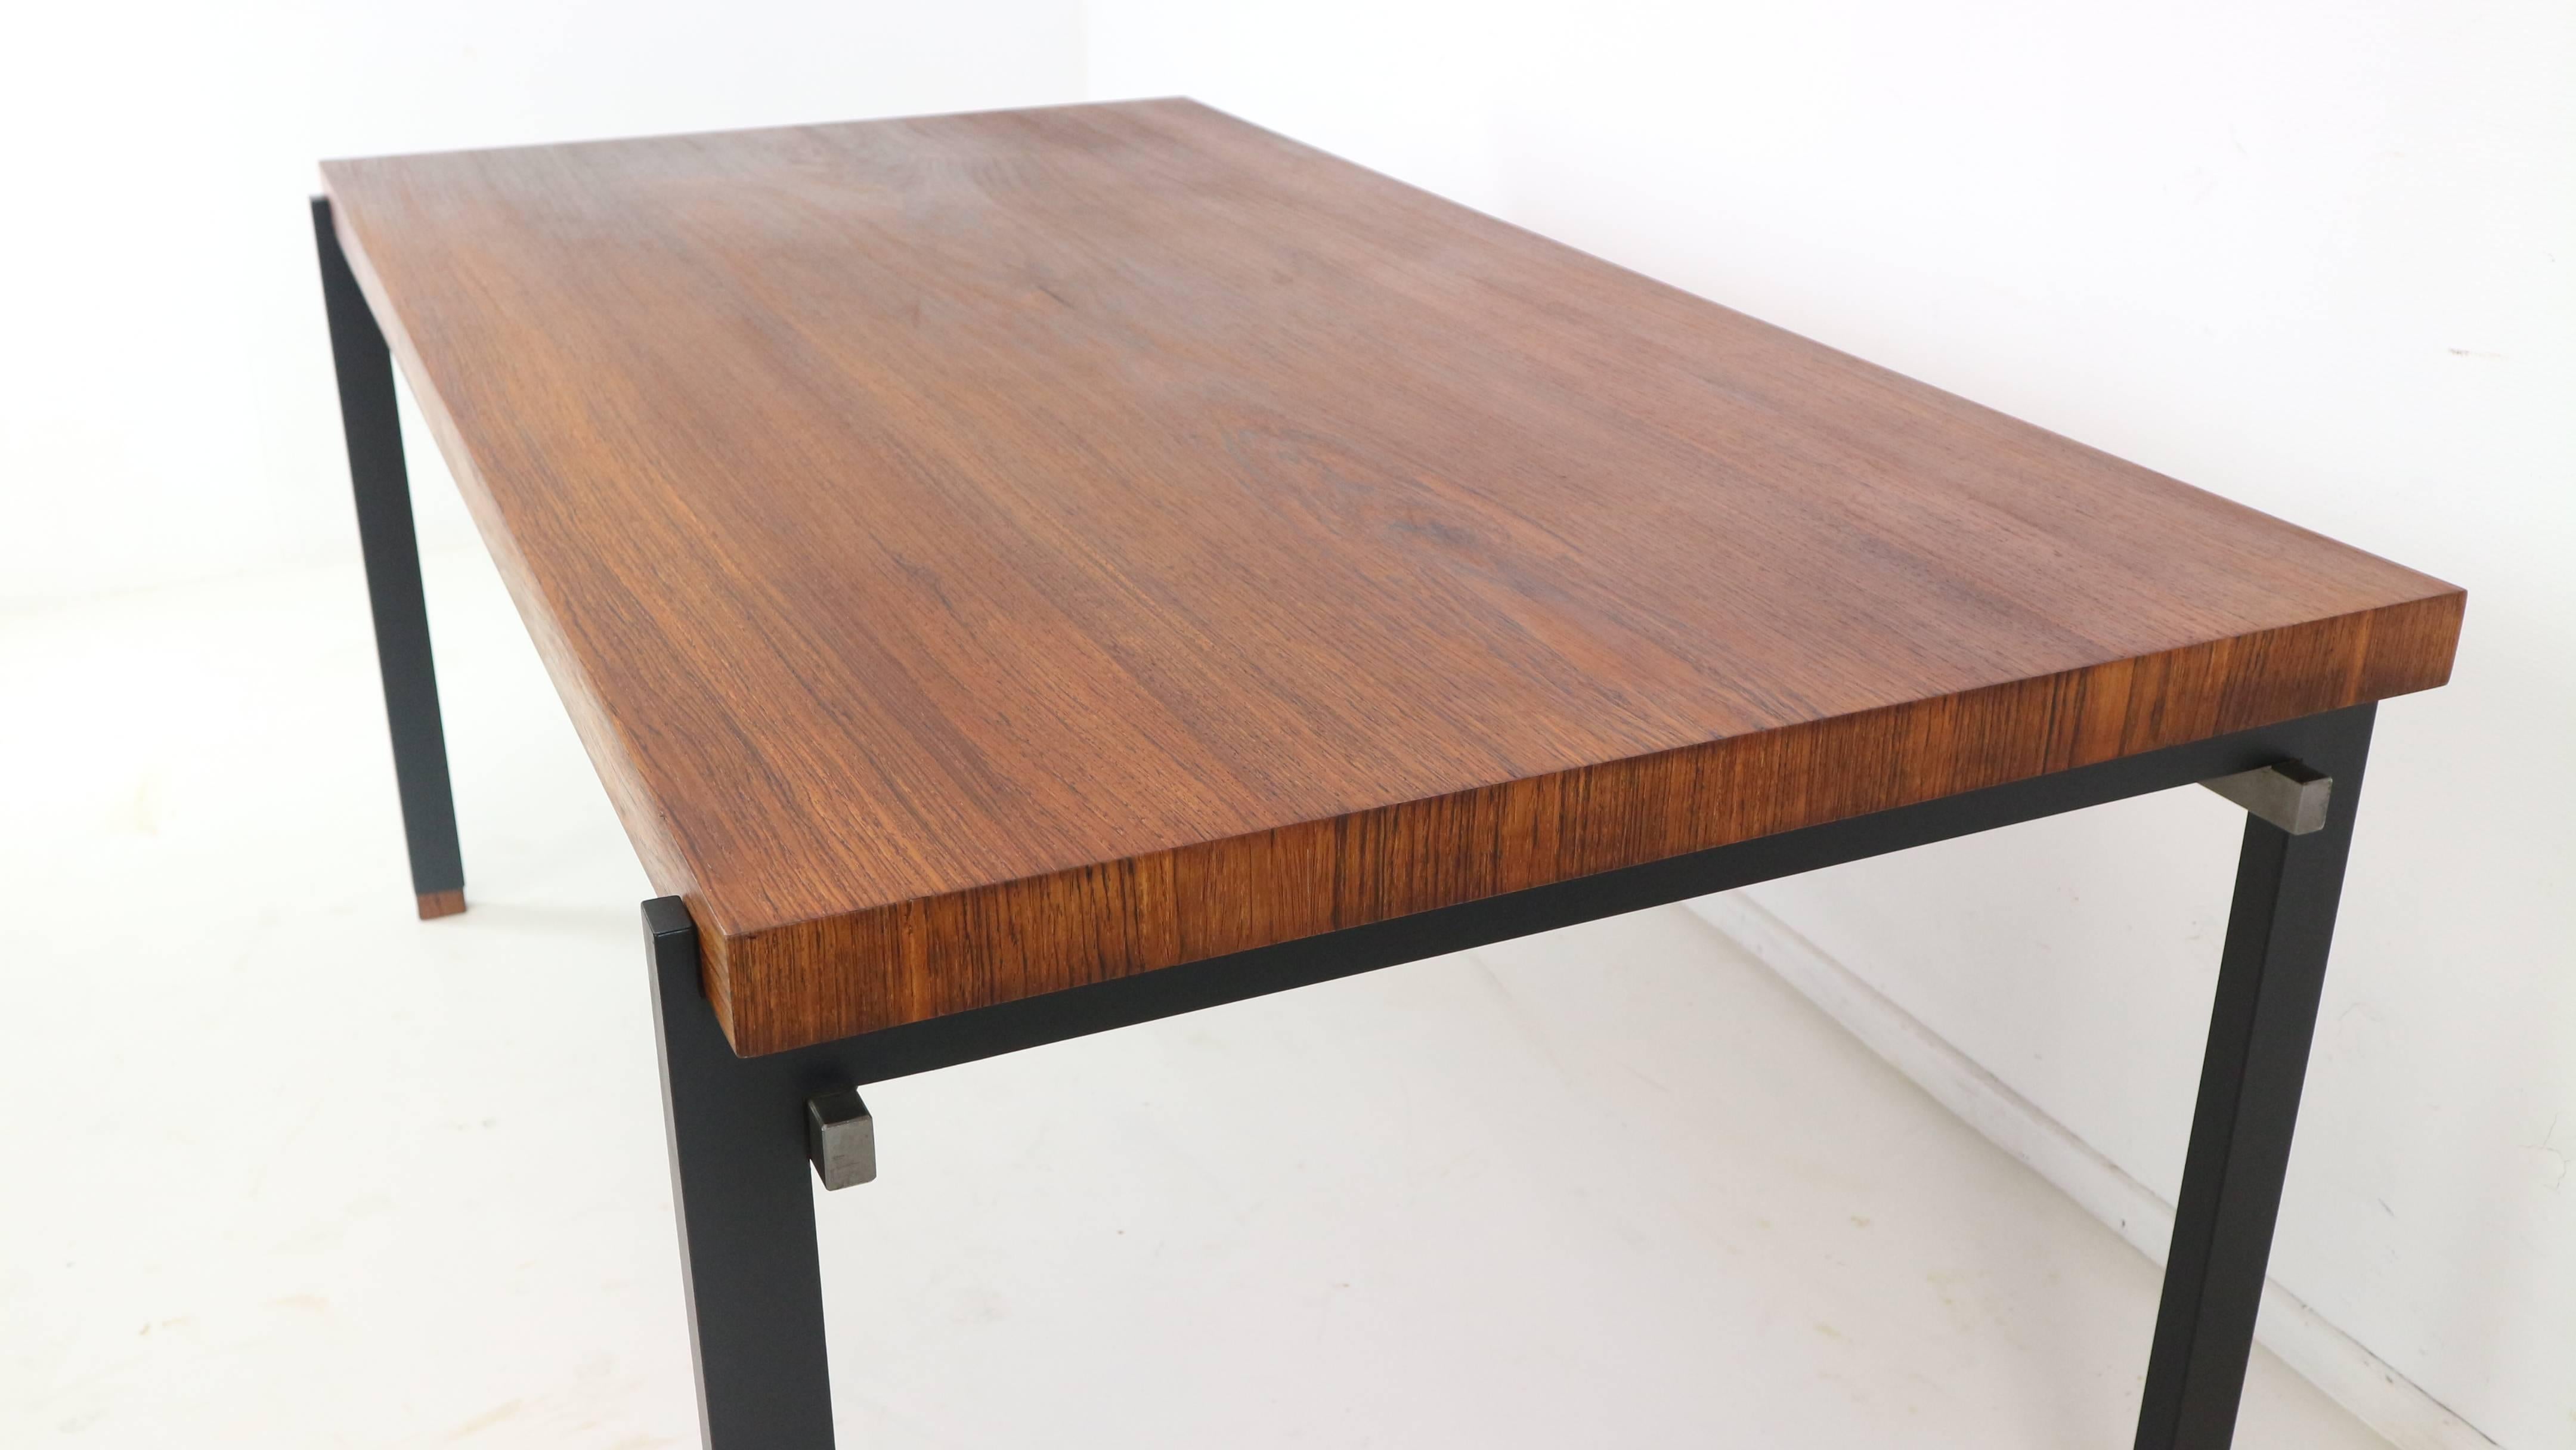 This dining table by Alfred Hendrickx, was designed in the 1960s for Belgian company Belform. The table features a rosewood veneered top and a modernist black metal and nickel colored frame with rosewood socks.